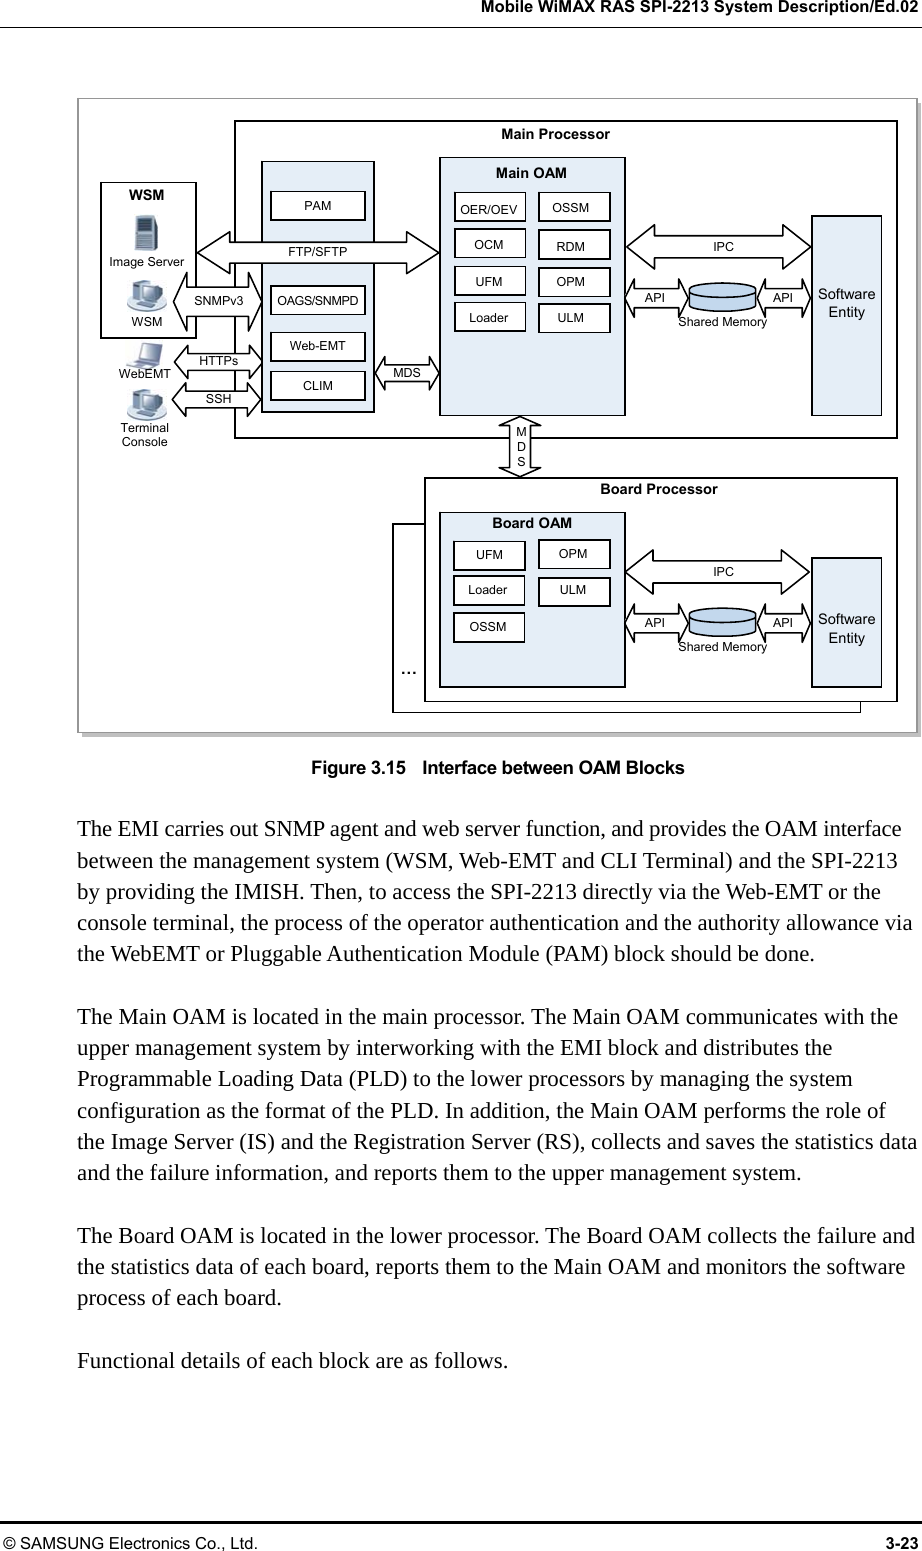   Mobile WiMAX RAS SPI-2213 System Description/Ed.02 © SAMSUNG Electronics Co., Ltd.  3-23  Figure 3.15    Interface between OAM Blocks  The EMI carries out SNMP agent and web server function, and provides the OAM interface between the management system (WSM, Web-EMT and CLI Terminal) and the SPI-2213 by providing the IMISH. Then, to access the SPI-2213 directly via the Web-EMT or the console terminal, the process of the operator authentication and the authority allowance via the WebEMT or Pluggable Authentication Module (PAM) block should be done.  The Main OAM is located in the main processor. The Main OAM communicates with the upper management system by interworking with the EMI block and distributes the Programmable Loading Data (PLD) to the lower processors by managing the system configuration as the format of the PLD. In addition, the Main OAM performs the role of the Image Server (IS) and the Registration Server (RS), collects and saves the statistics data and the failure information, and reports them to the upper management system.  The Board OAM is located in the lower processor. The Board OAM collects the failure and the statistics data of each board, reports them to the Main OAM and monitors the software process of each board.  Functional details of each block are as follows. OPMUFMMain ProcessorMain OAM IPC API APIShared Memory Web-EMTWSM Image Server WSMFTP/SFTPSNMPv3 Board OAM Loader ULMOSSMBoard Processor …HTTPs SSH Terminal Console CLIMMDSOAGS/SNMPDWebEMT SoftwareEntity PAM UFMLoaderOER/OEVOCM OPM ULM OSSMRDMMDSIPC API APIShared Memory SoftwareEntity 